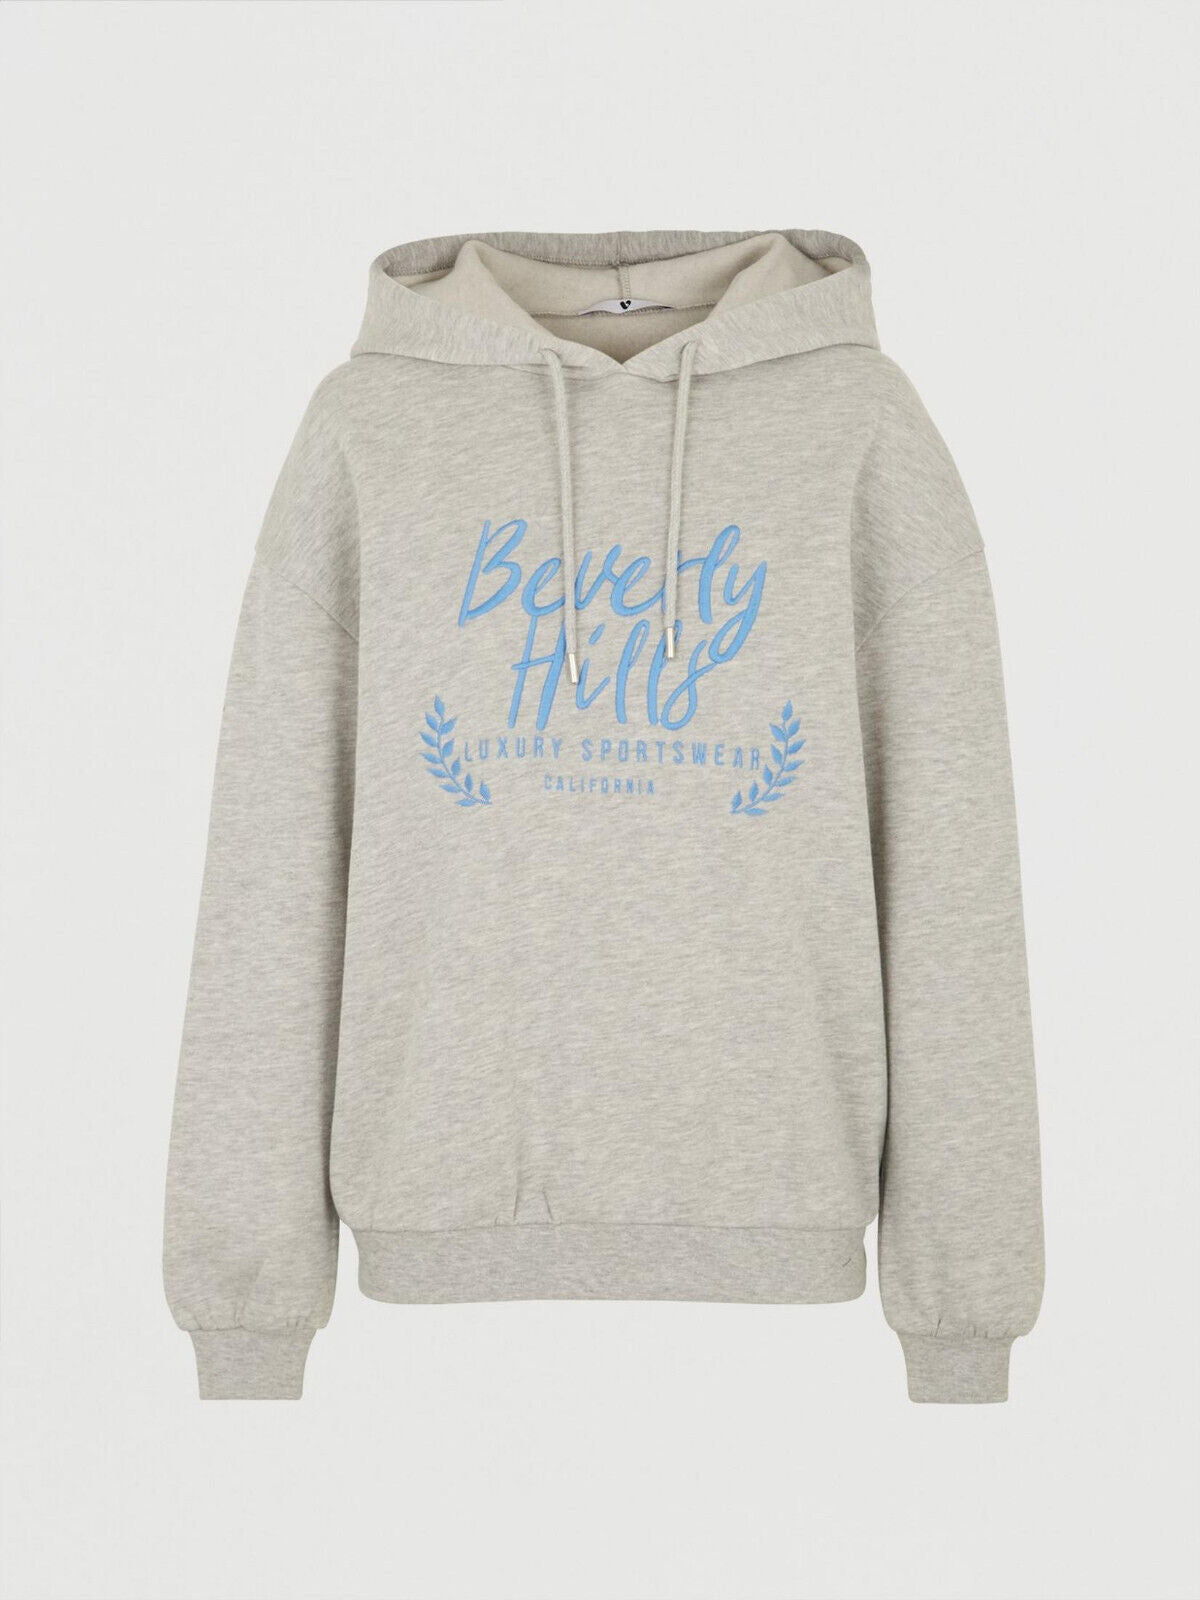 Michelle Keegan Grey Embroidered Hoodie Size 8 **** V398